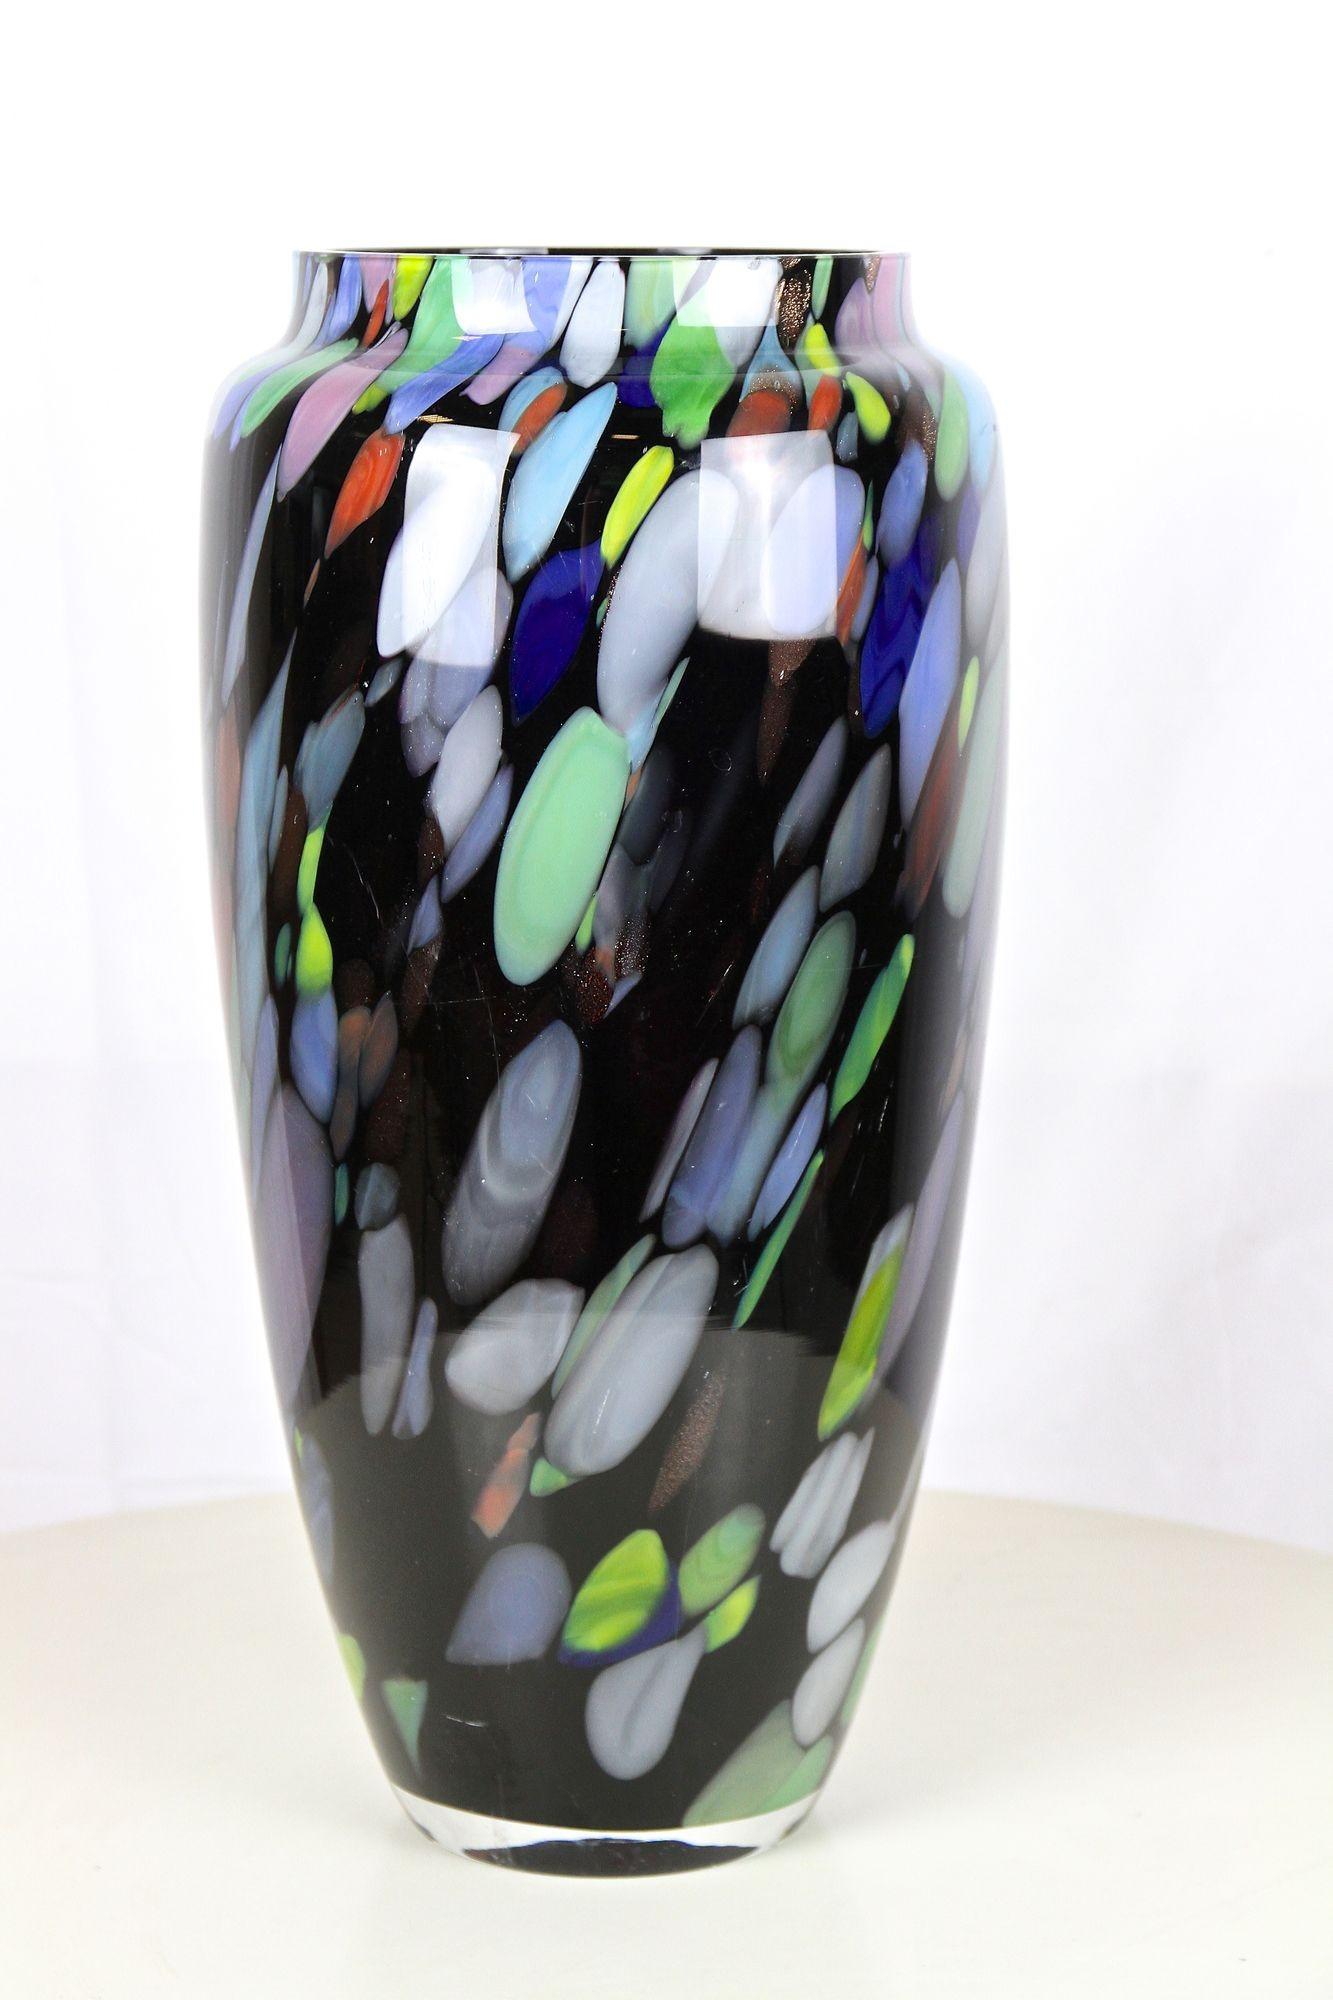 Outstanding looking, multicolored large Murano glass vase from the late 20th century around 1975 in Italy. This beautifully shaped, super dark purple, actually black looking glass body impresses with a very nice contemporary so-called 